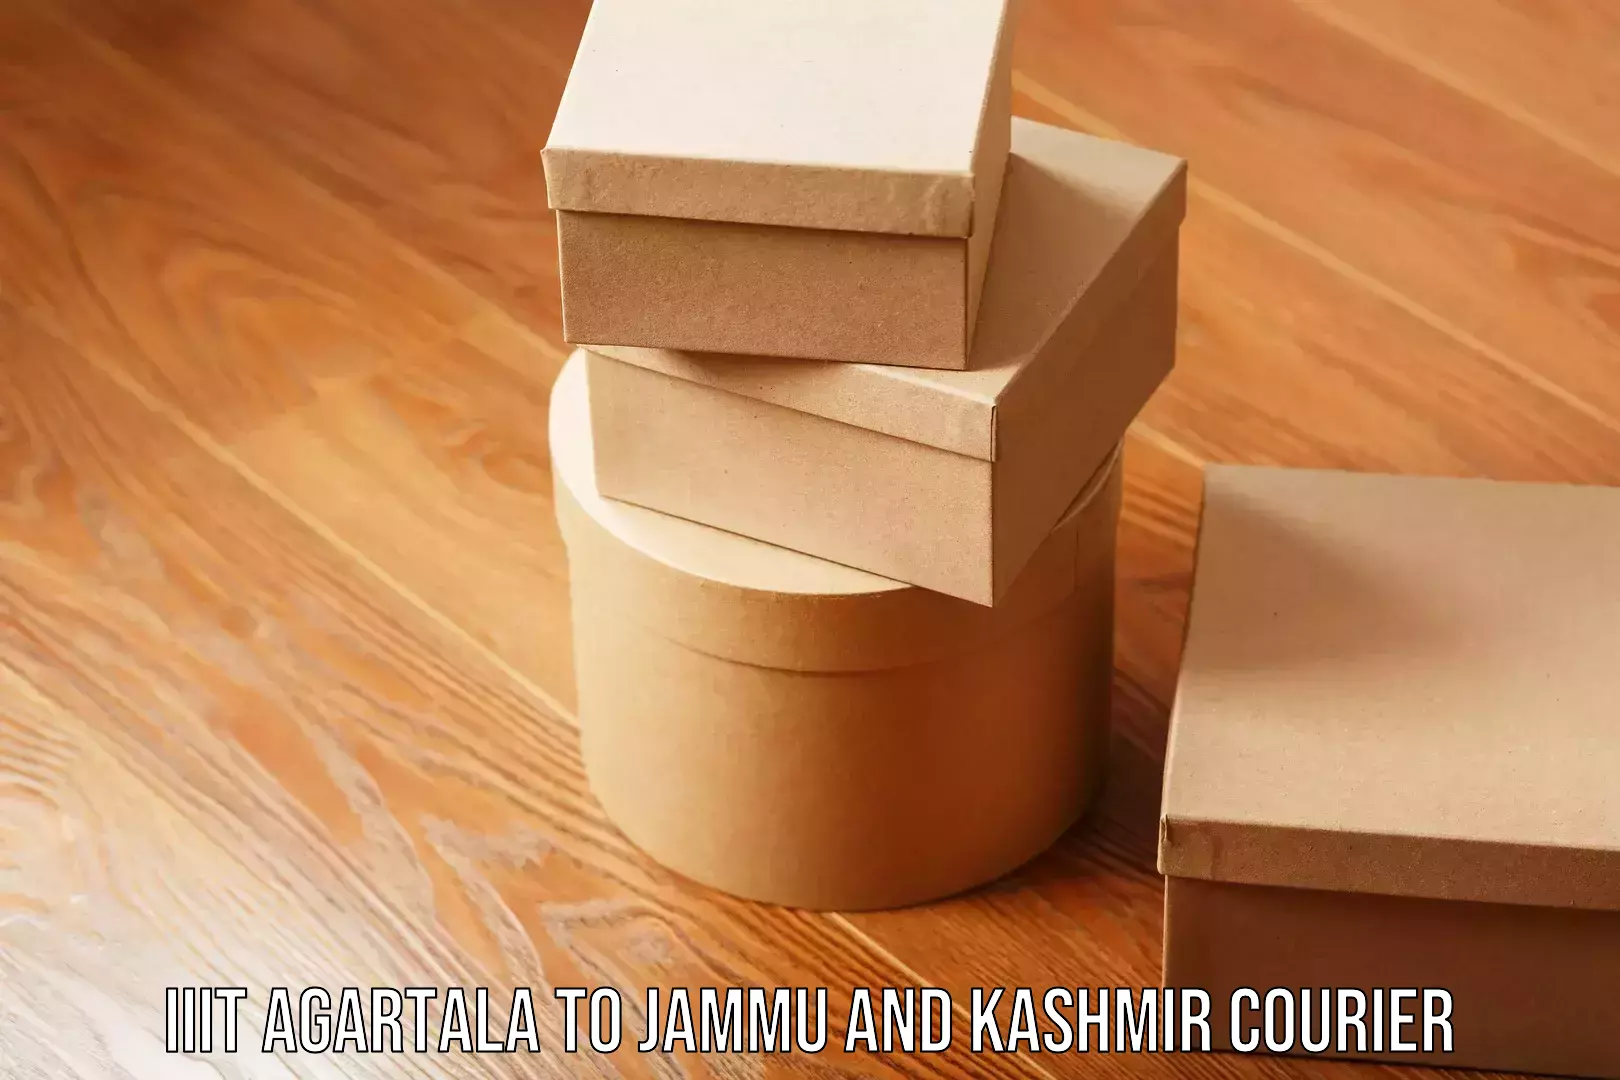 Business delivery service IIIT Agartala to Jammu and Kashmir